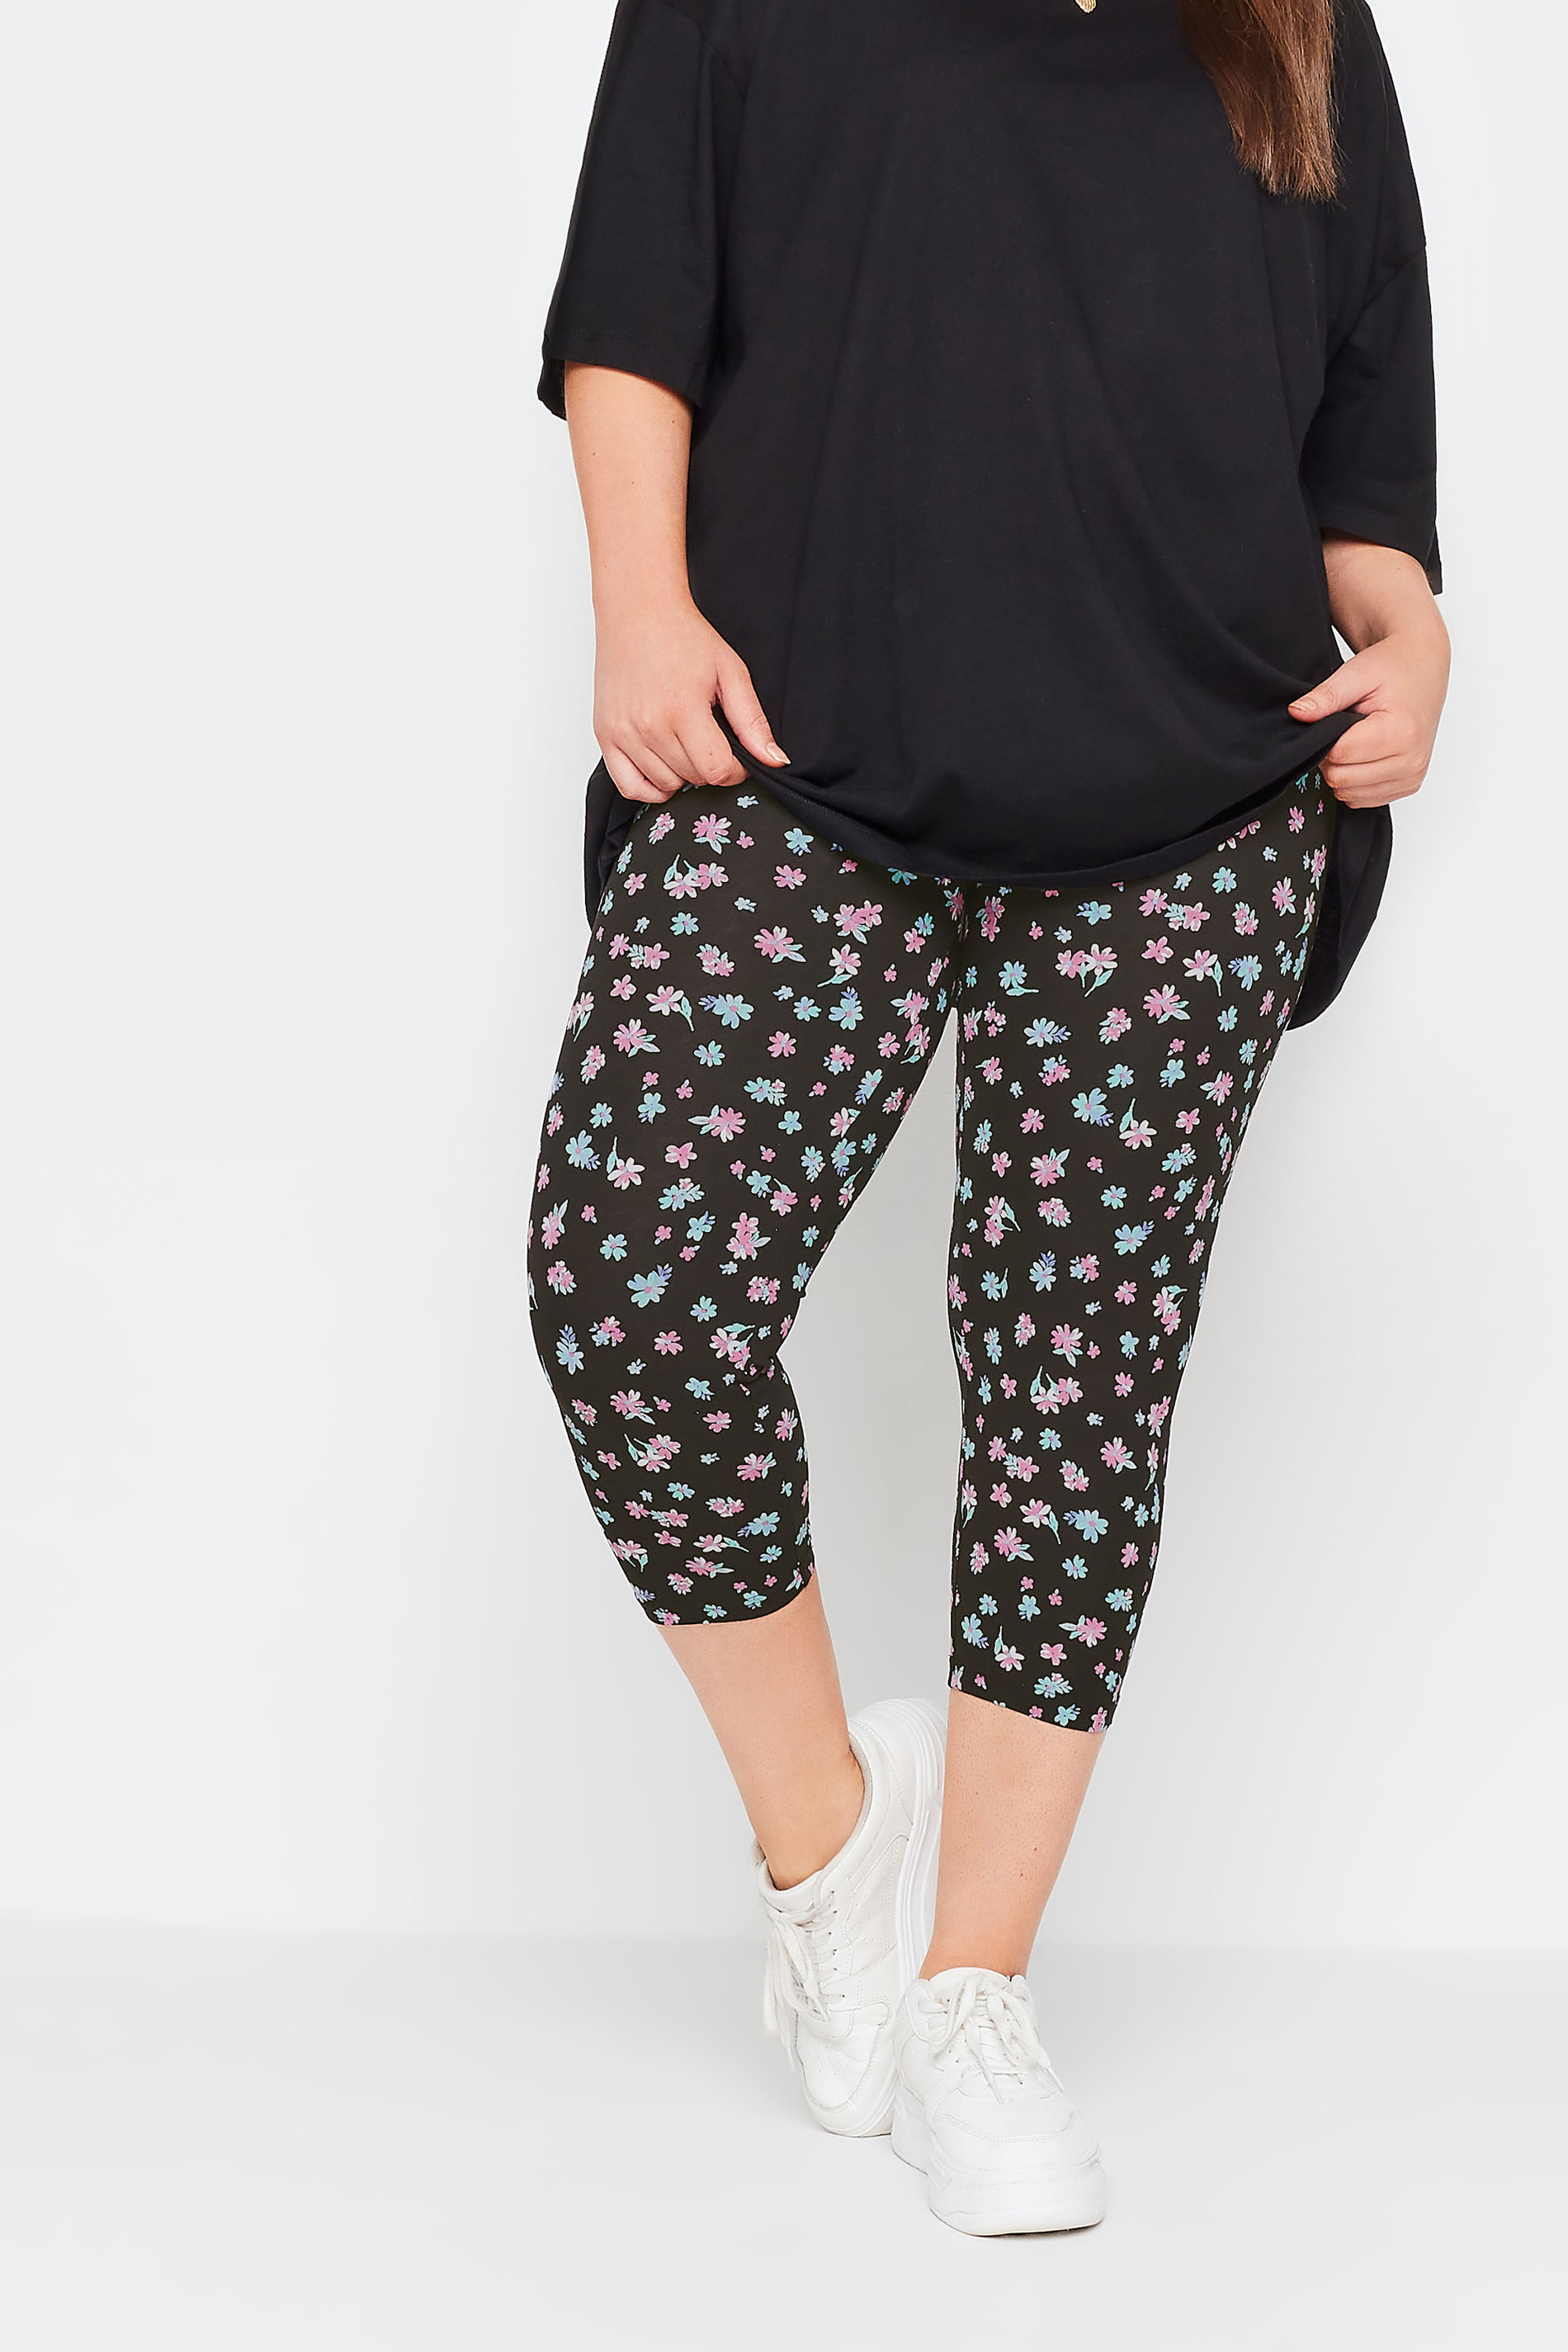 YOURS Plus Size 2 PACK Black & White Ditsy Floral Print Cropped Leggings | Yours Clothing 2